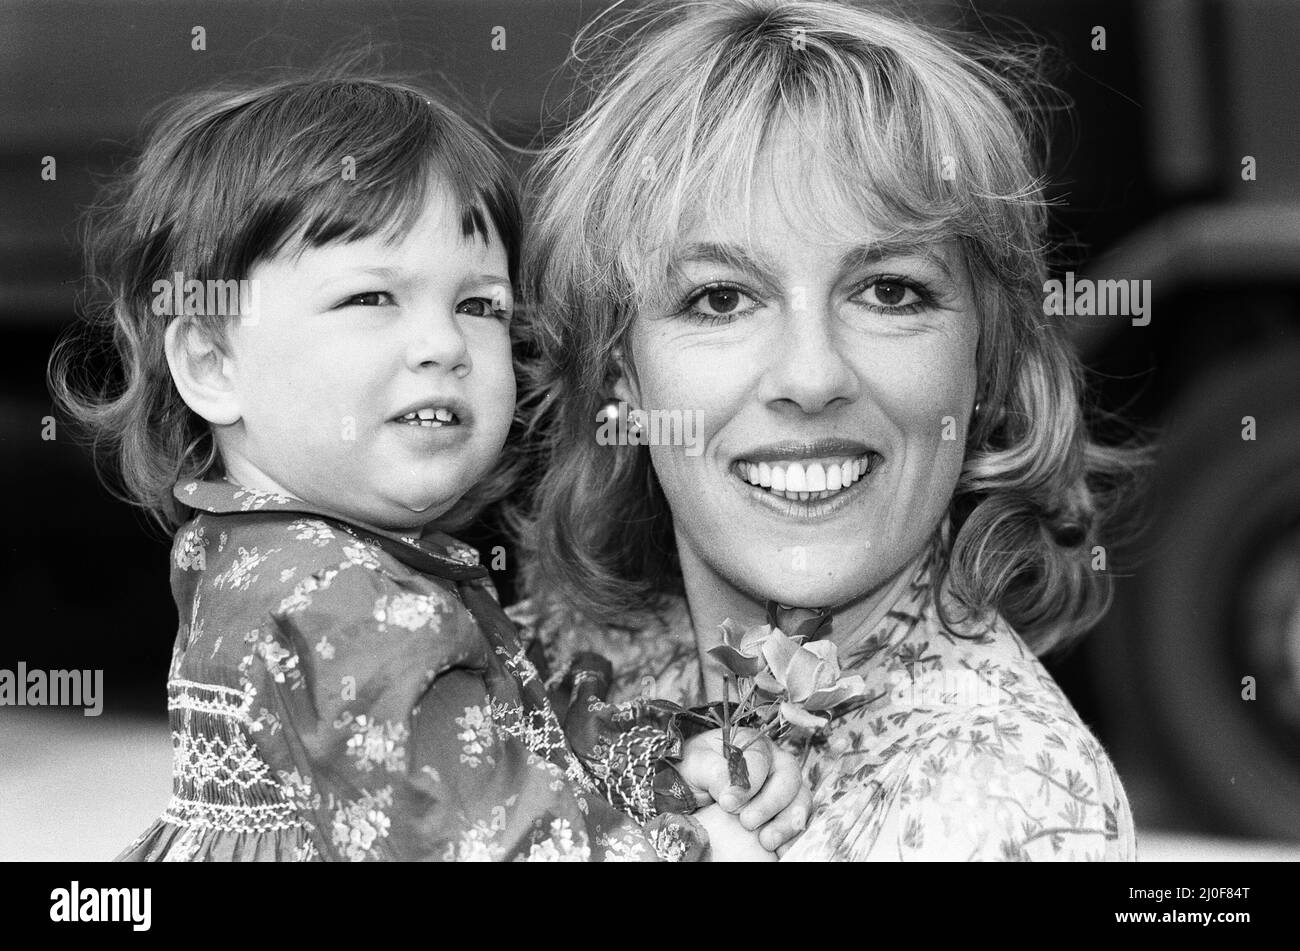 Esther Rantzen pictured with her daughter Emily at the Chelsea Flower Show. Emily has had a Rose named after her. 21st May 1979. Stock Photo